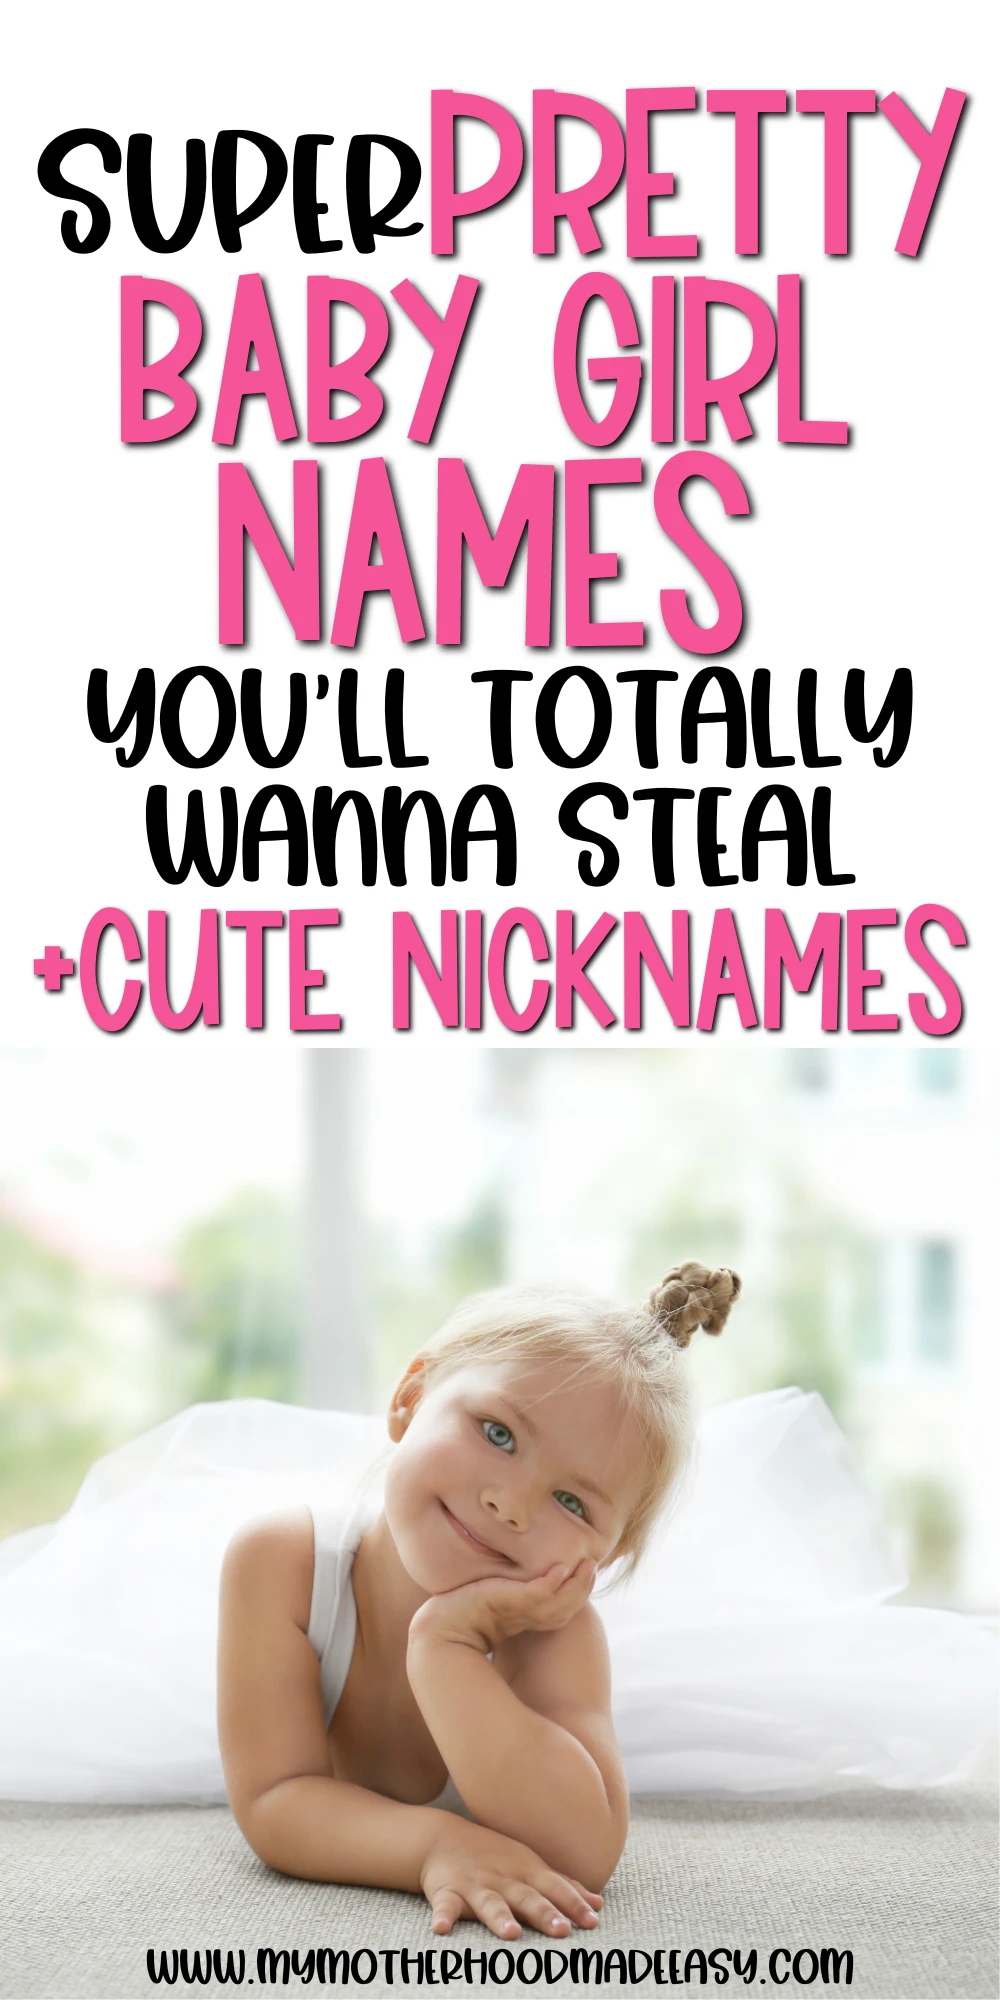 Looking for the perfect Pretty baby Girl name to give to your new blessing coming soon? Here is a list of 100+ Pretty babyGirl names to choose from! From popular names like Sophia and Emily, to unique names like Harper and India, you're sure to find the perfect name for your little girl.